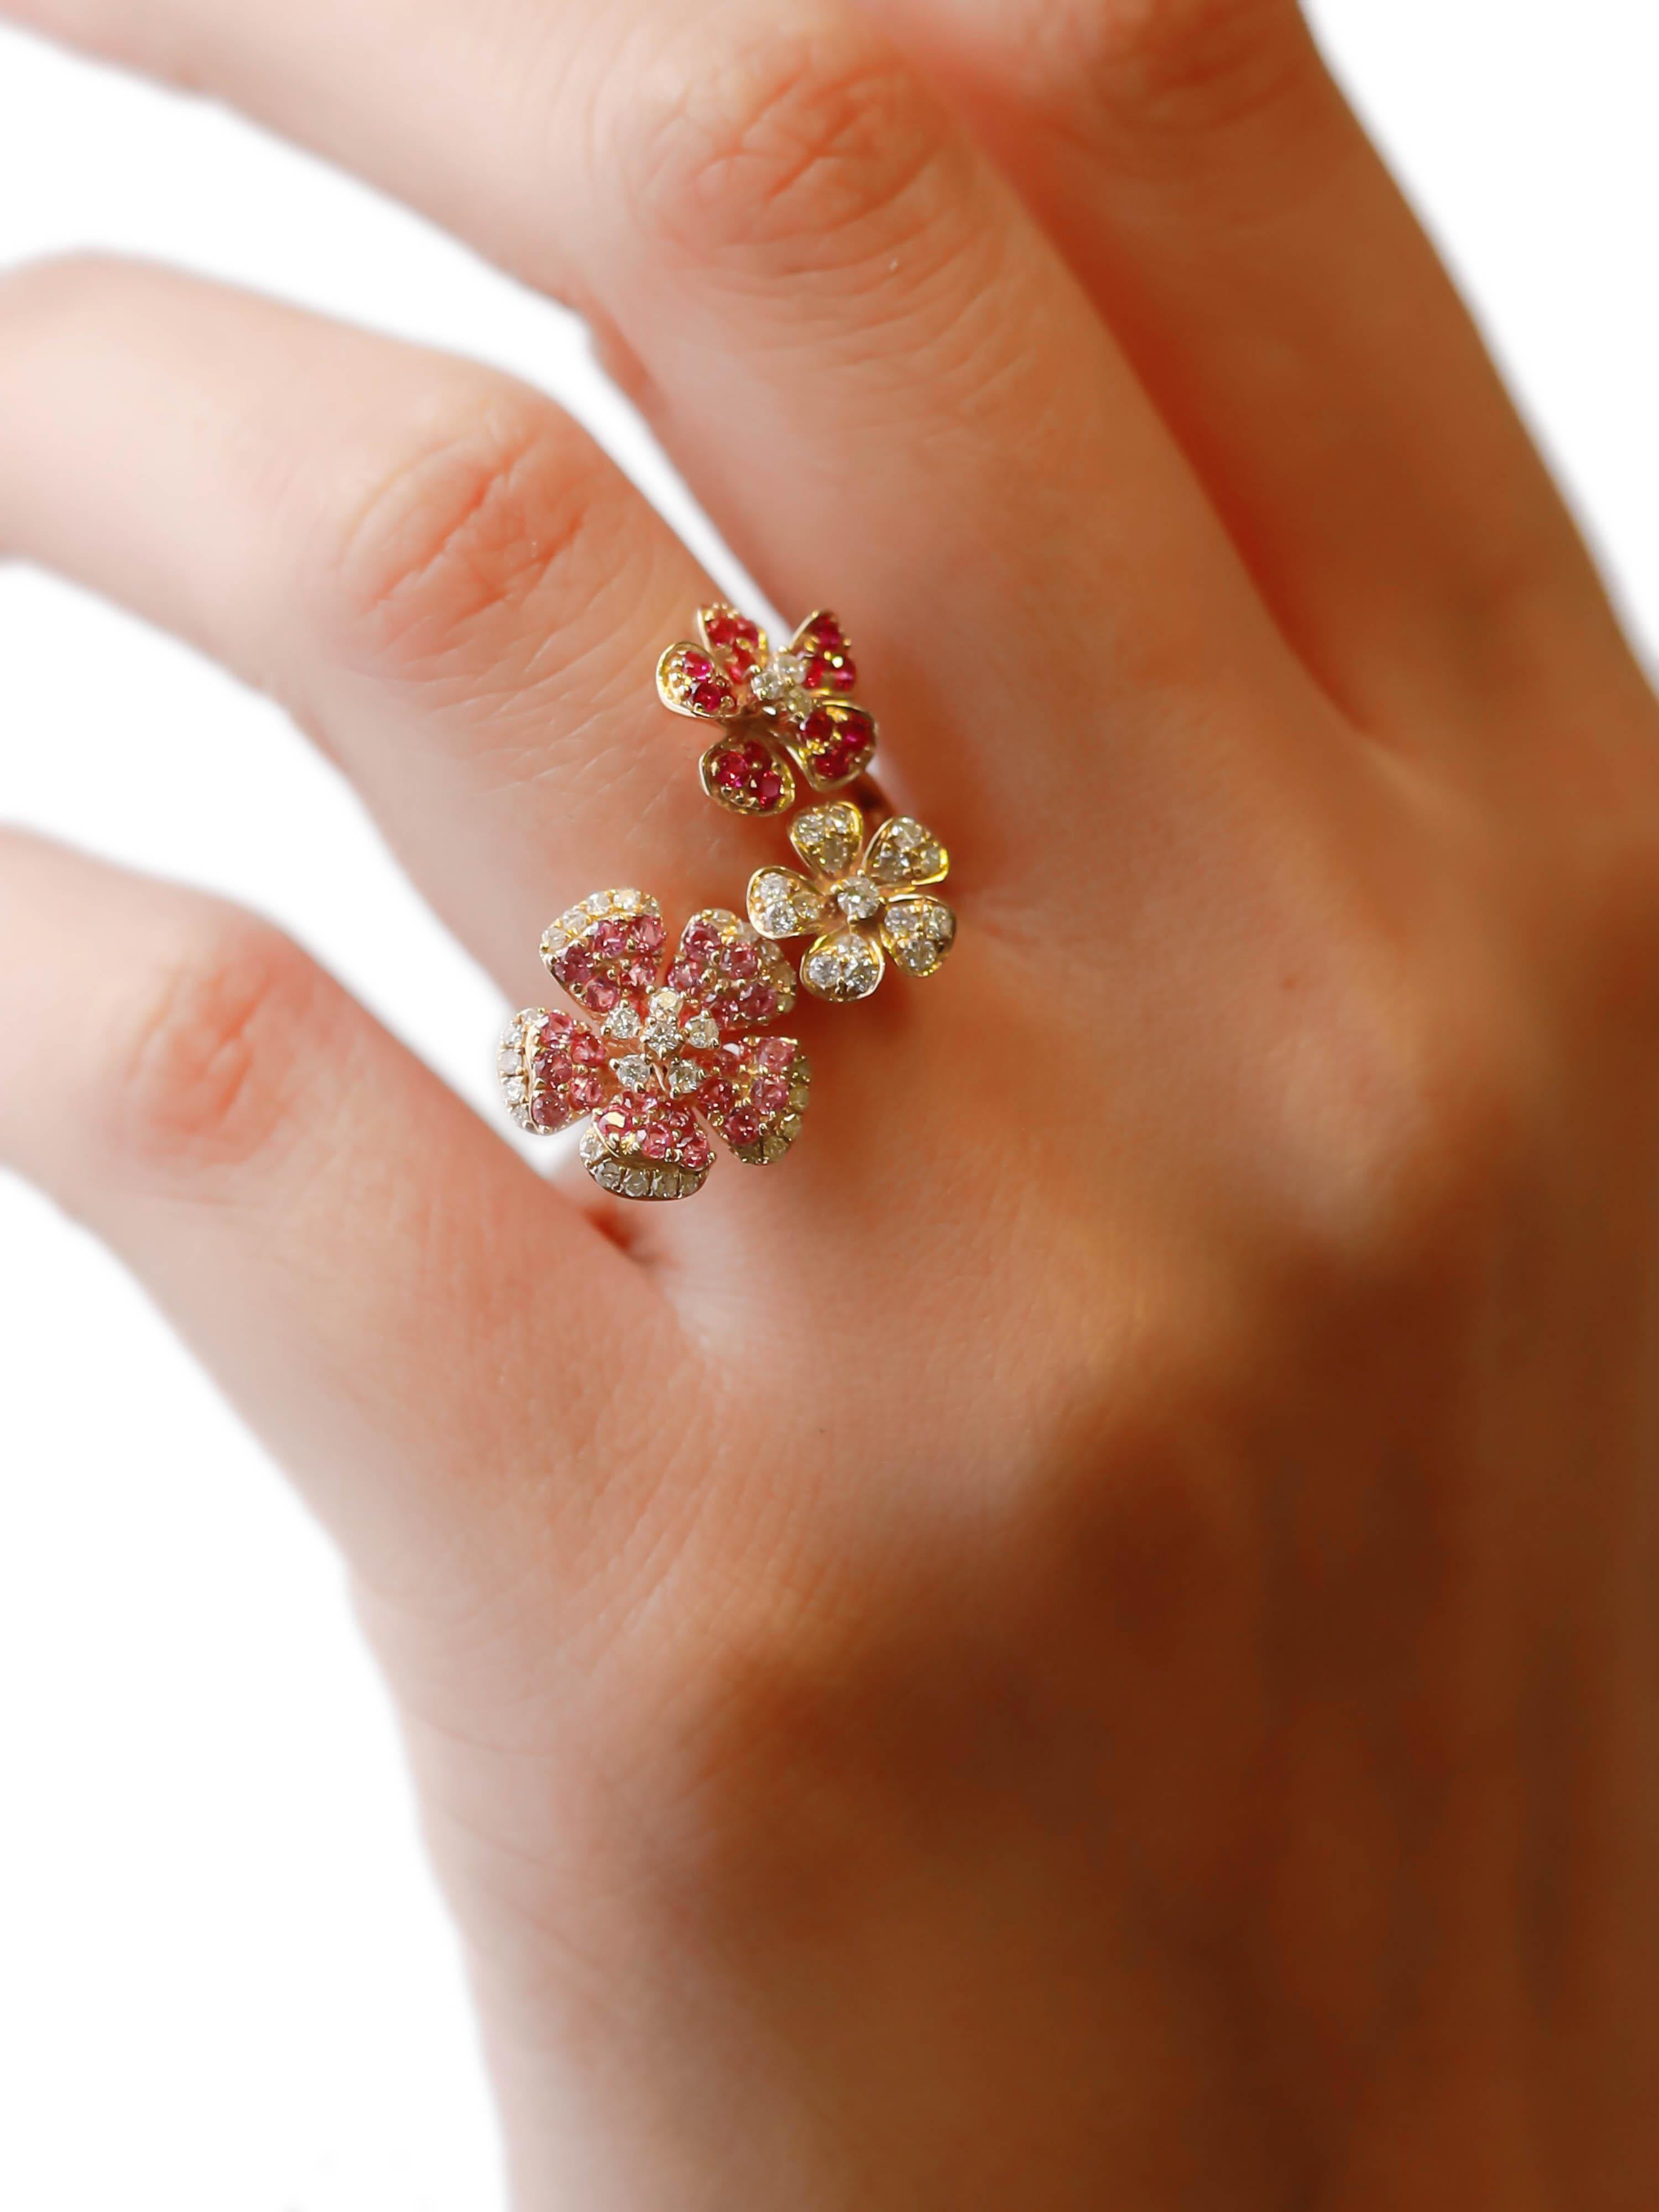 14K Yellow Gold Three Daisy Flower Floral Ring 1.08Ct Pink Sapphire Pave Diamond In Excellent Condition For Sale In New York, NY